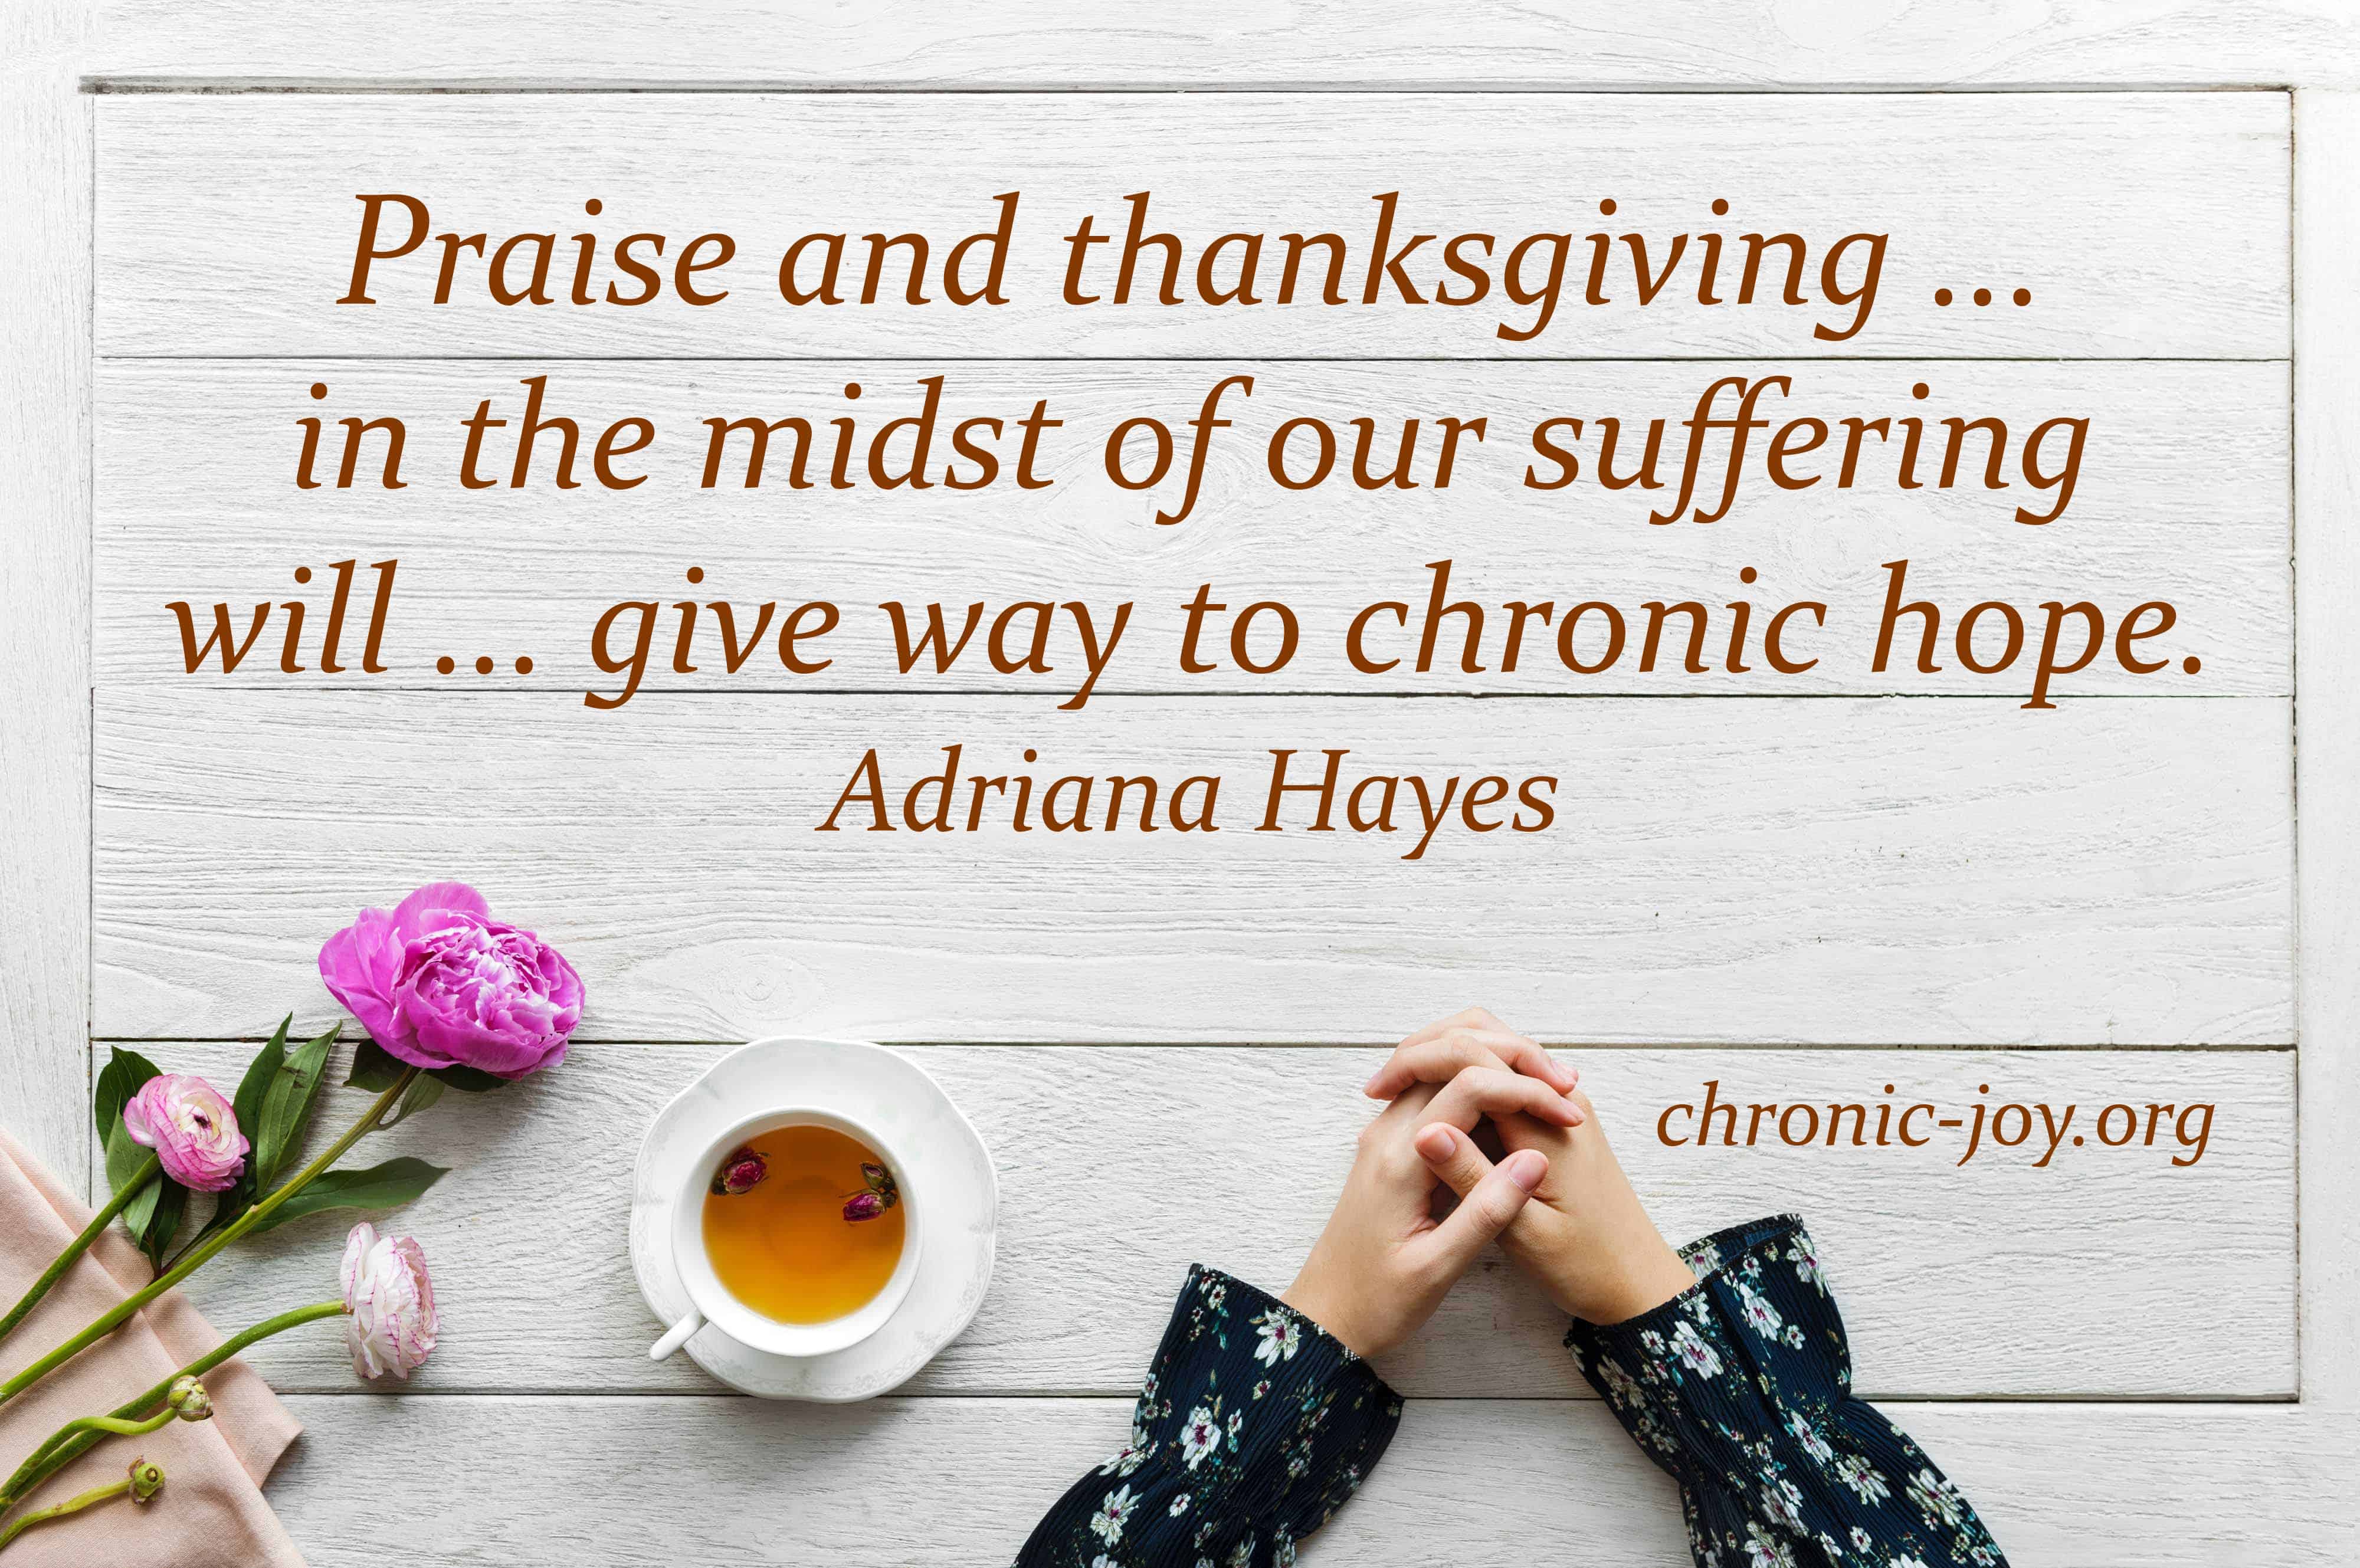 Praise and thanksgiving in suffering give way to chronic hope.